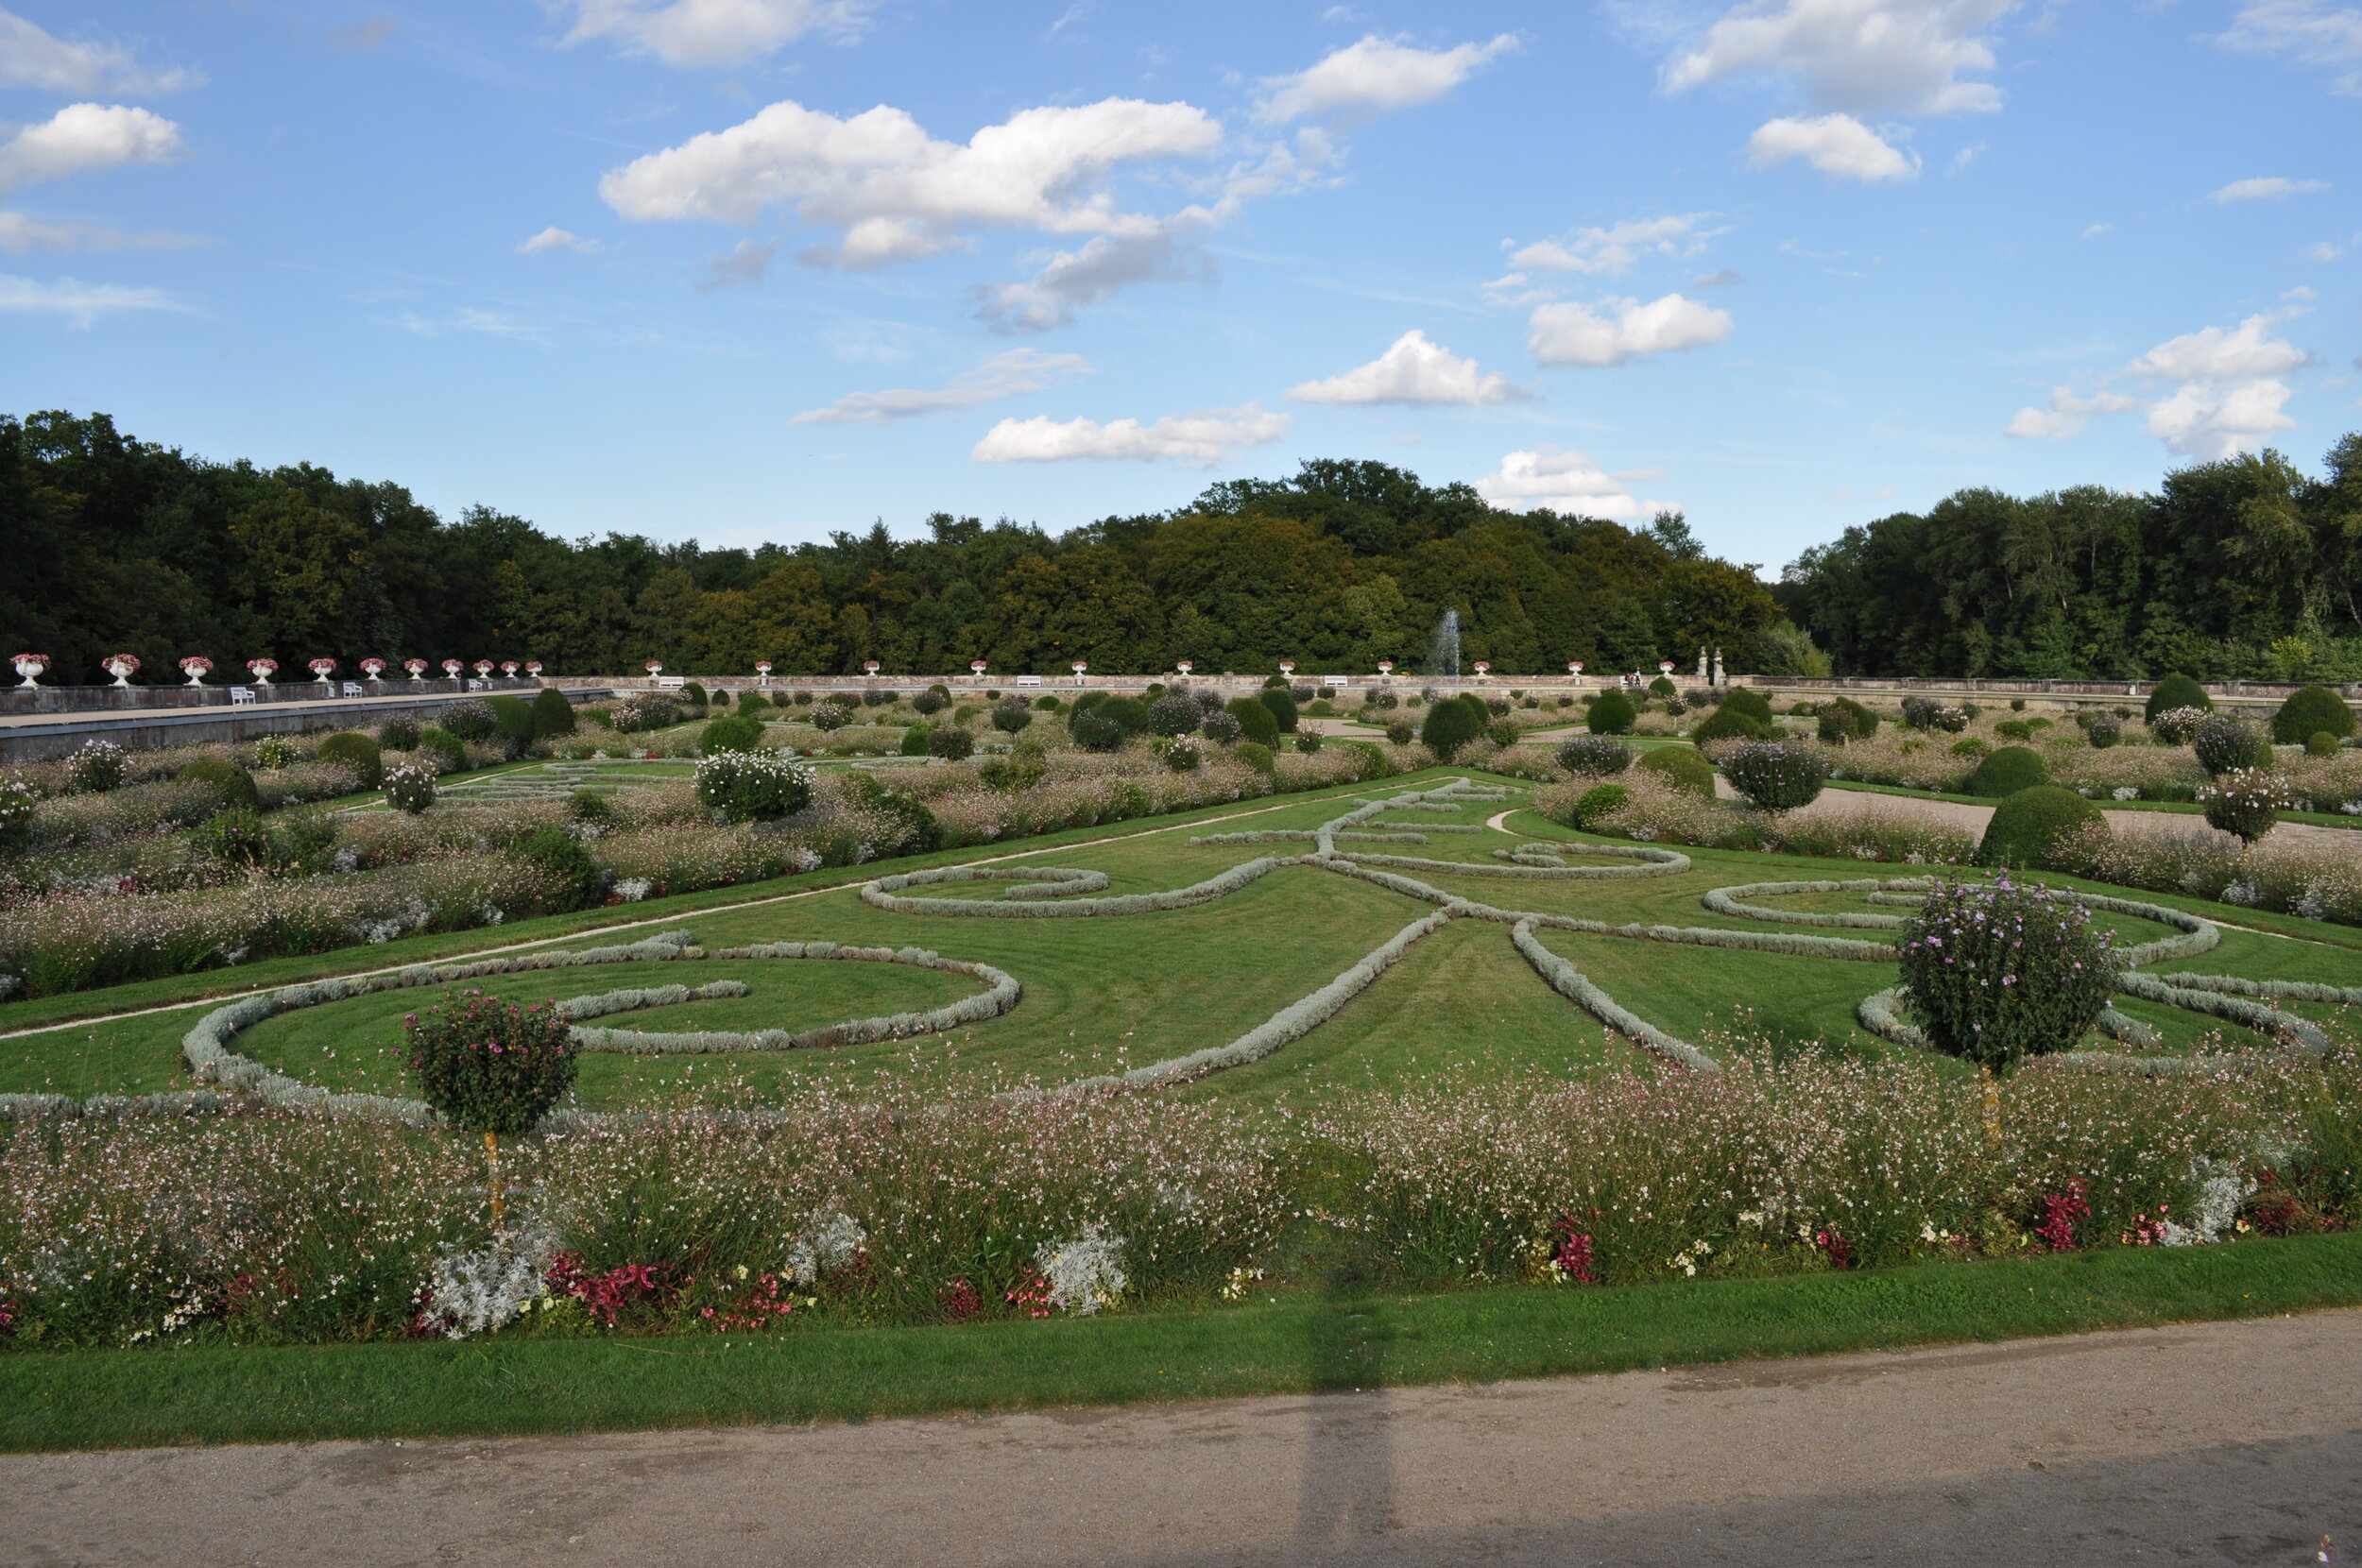 Playful, yet formal parterres at Chenonceau